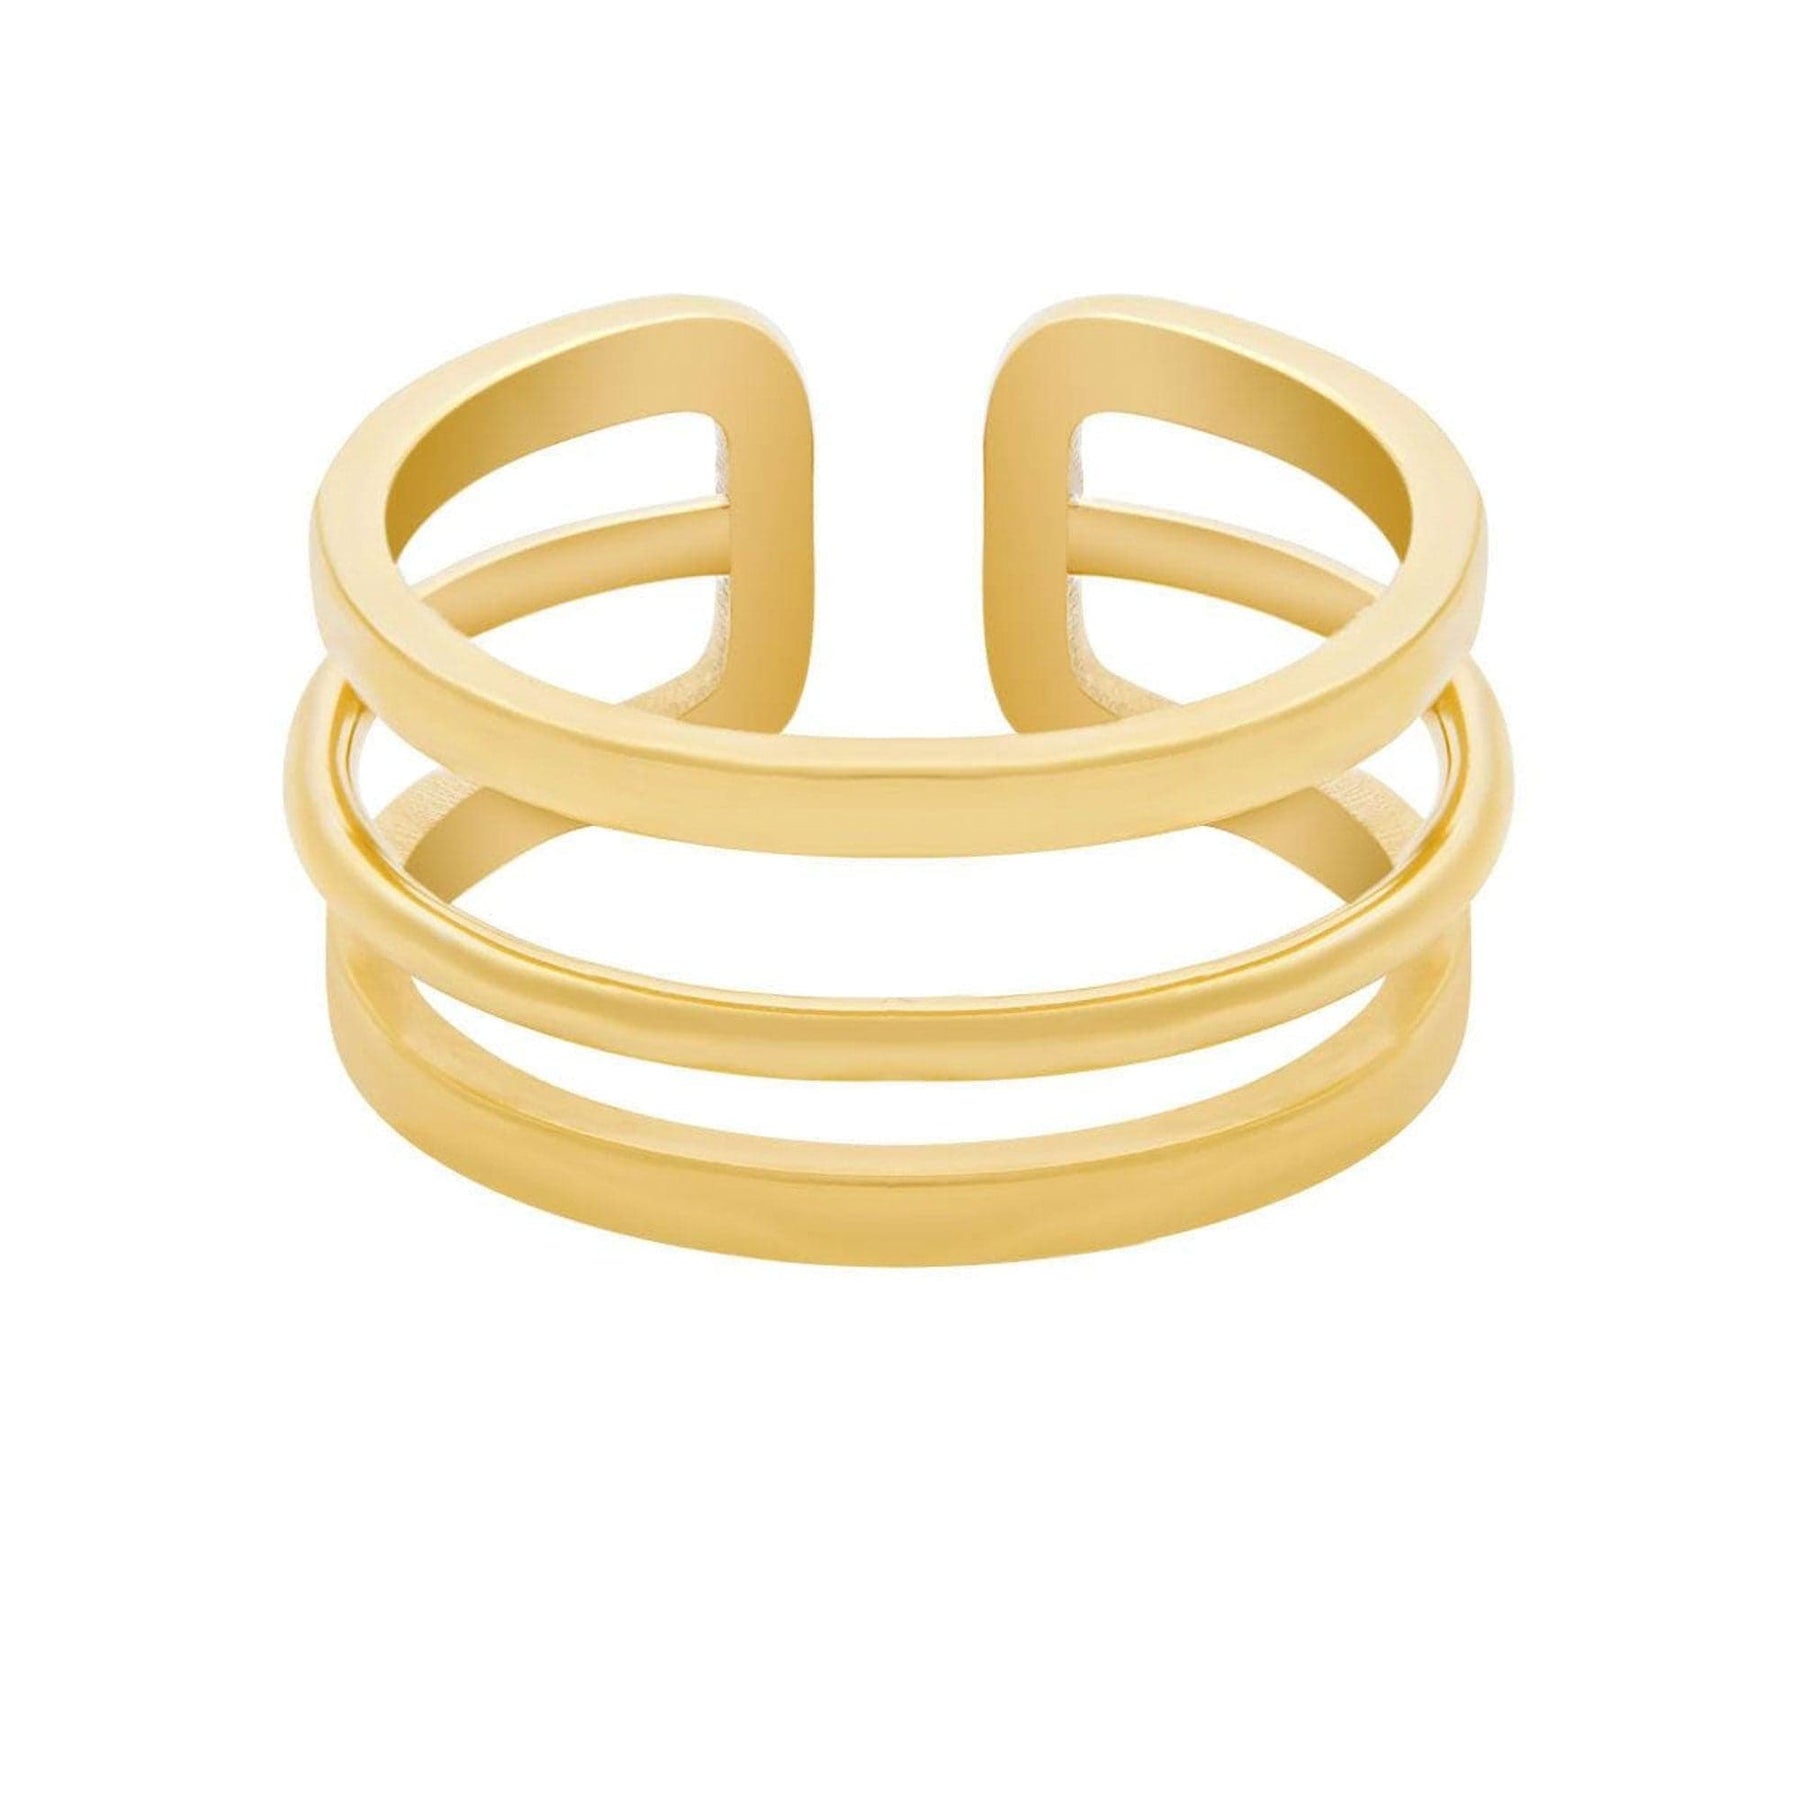 BohoMoon Stainless Steel Izzy Ring Gold / US 6 / UK L / EUR 51 (small)